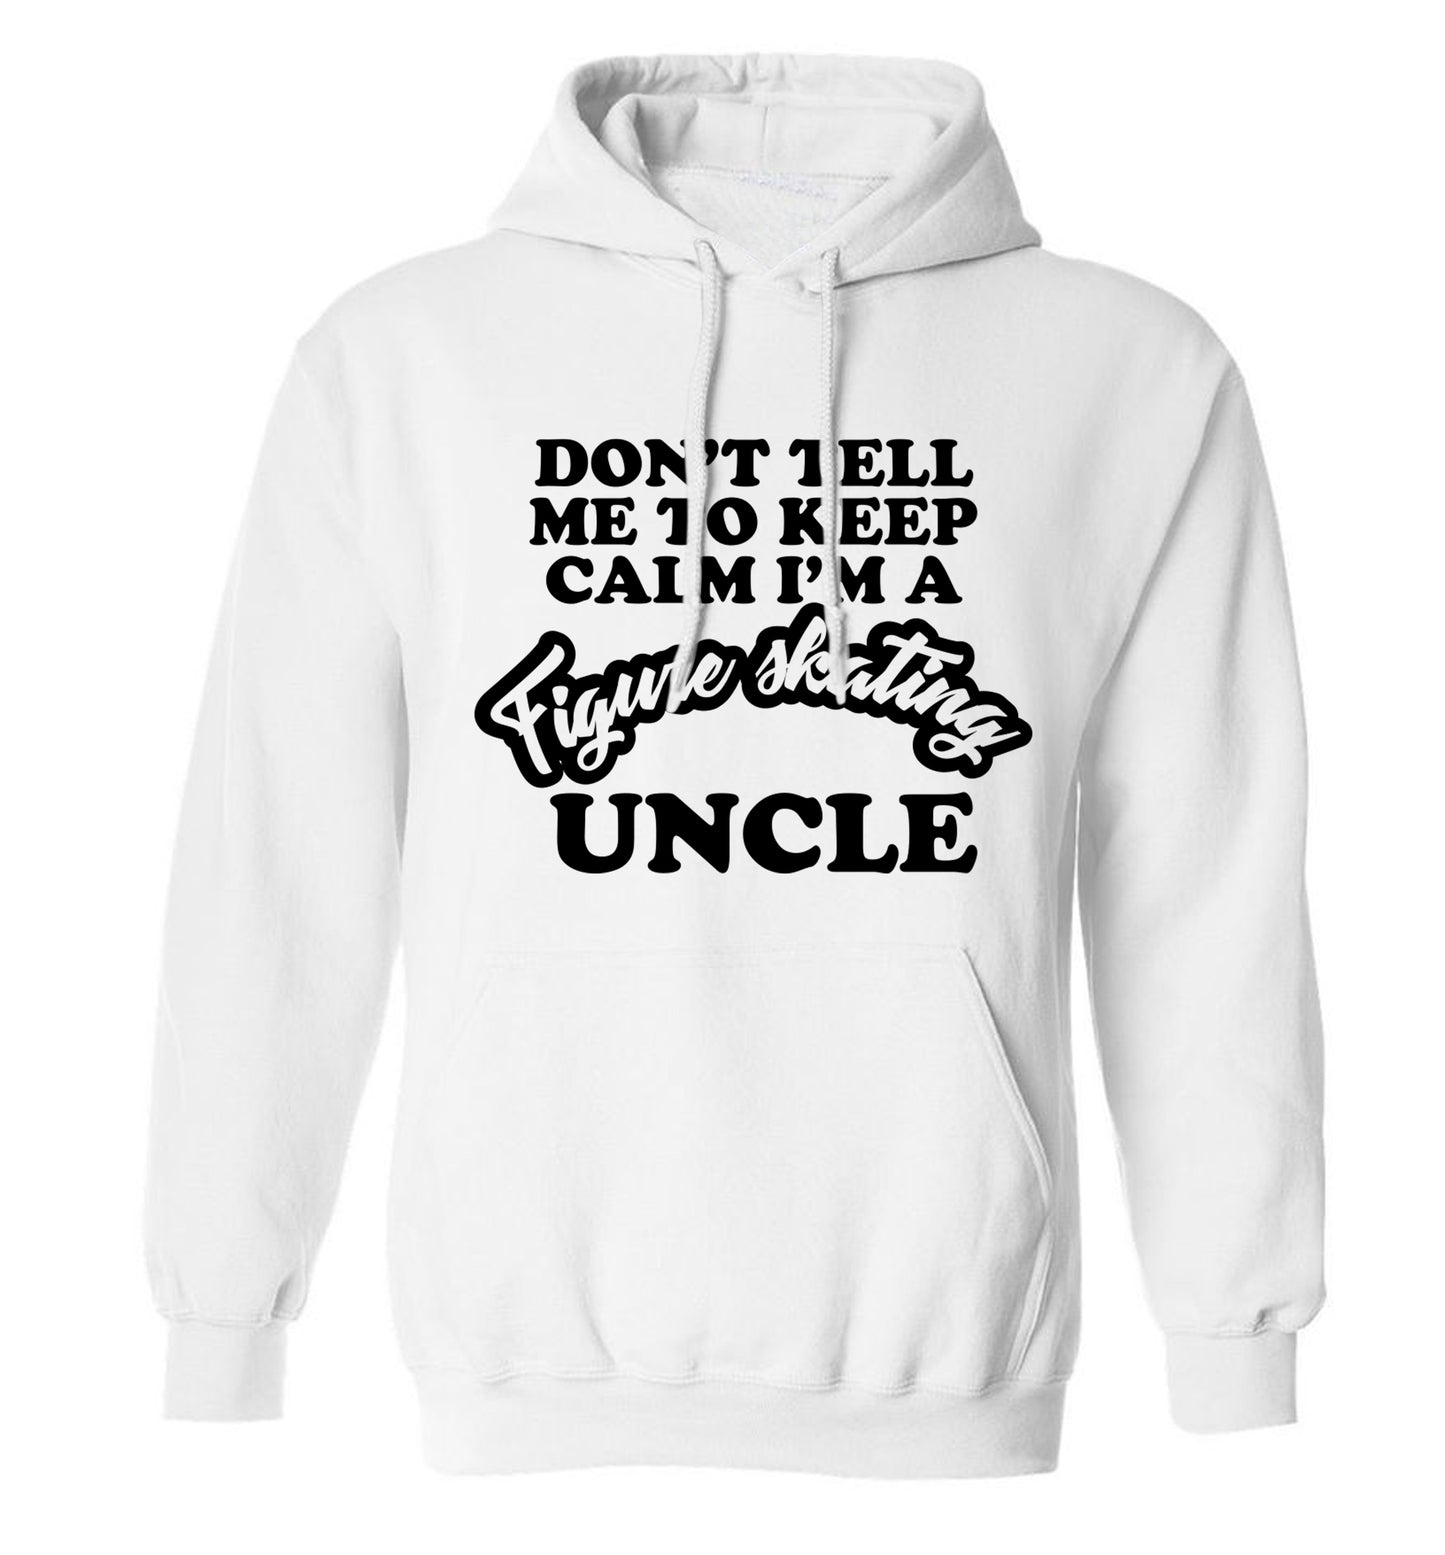 Don't tell me to keep calm I'm a figure skating uncle adults unisexwhite hoodie 2XL